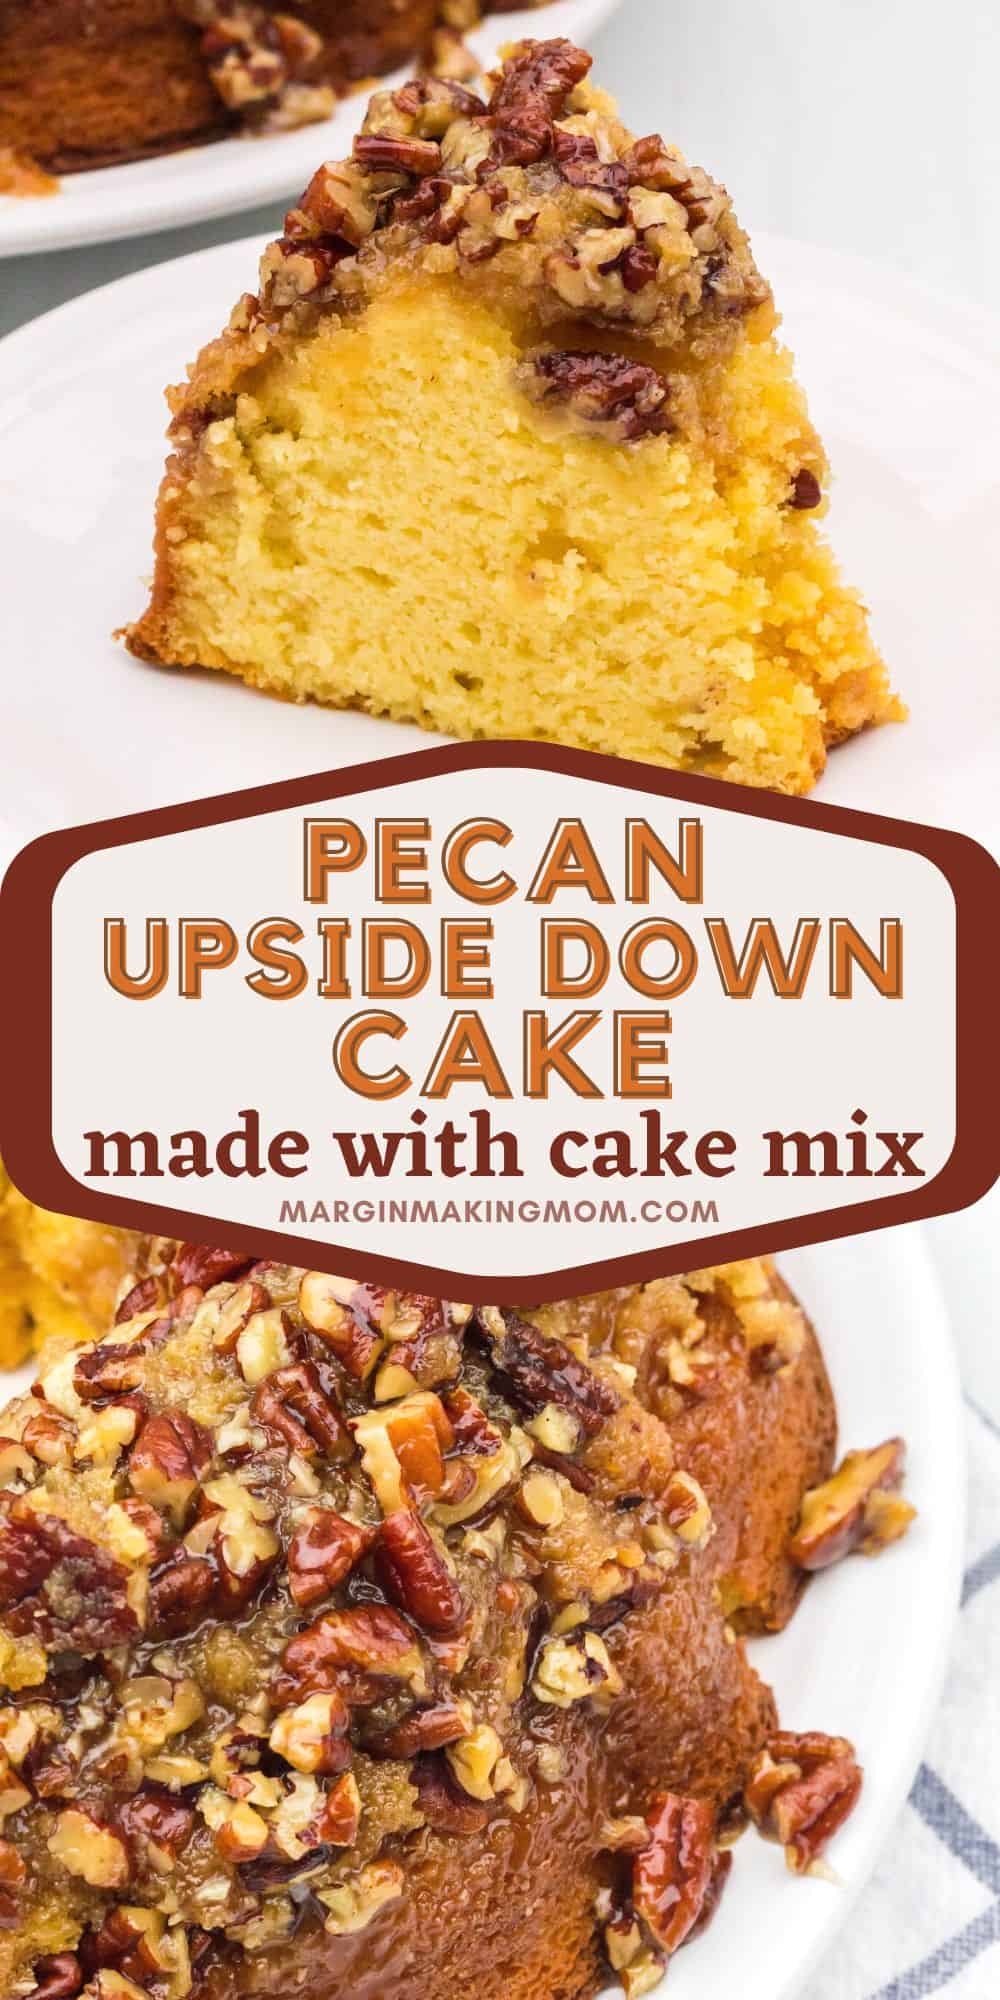 two photos; one shows a slice of pecan upside down cake on a plate, the other shows a detailed look at the pecan topping on a pecan upside down bundt cake